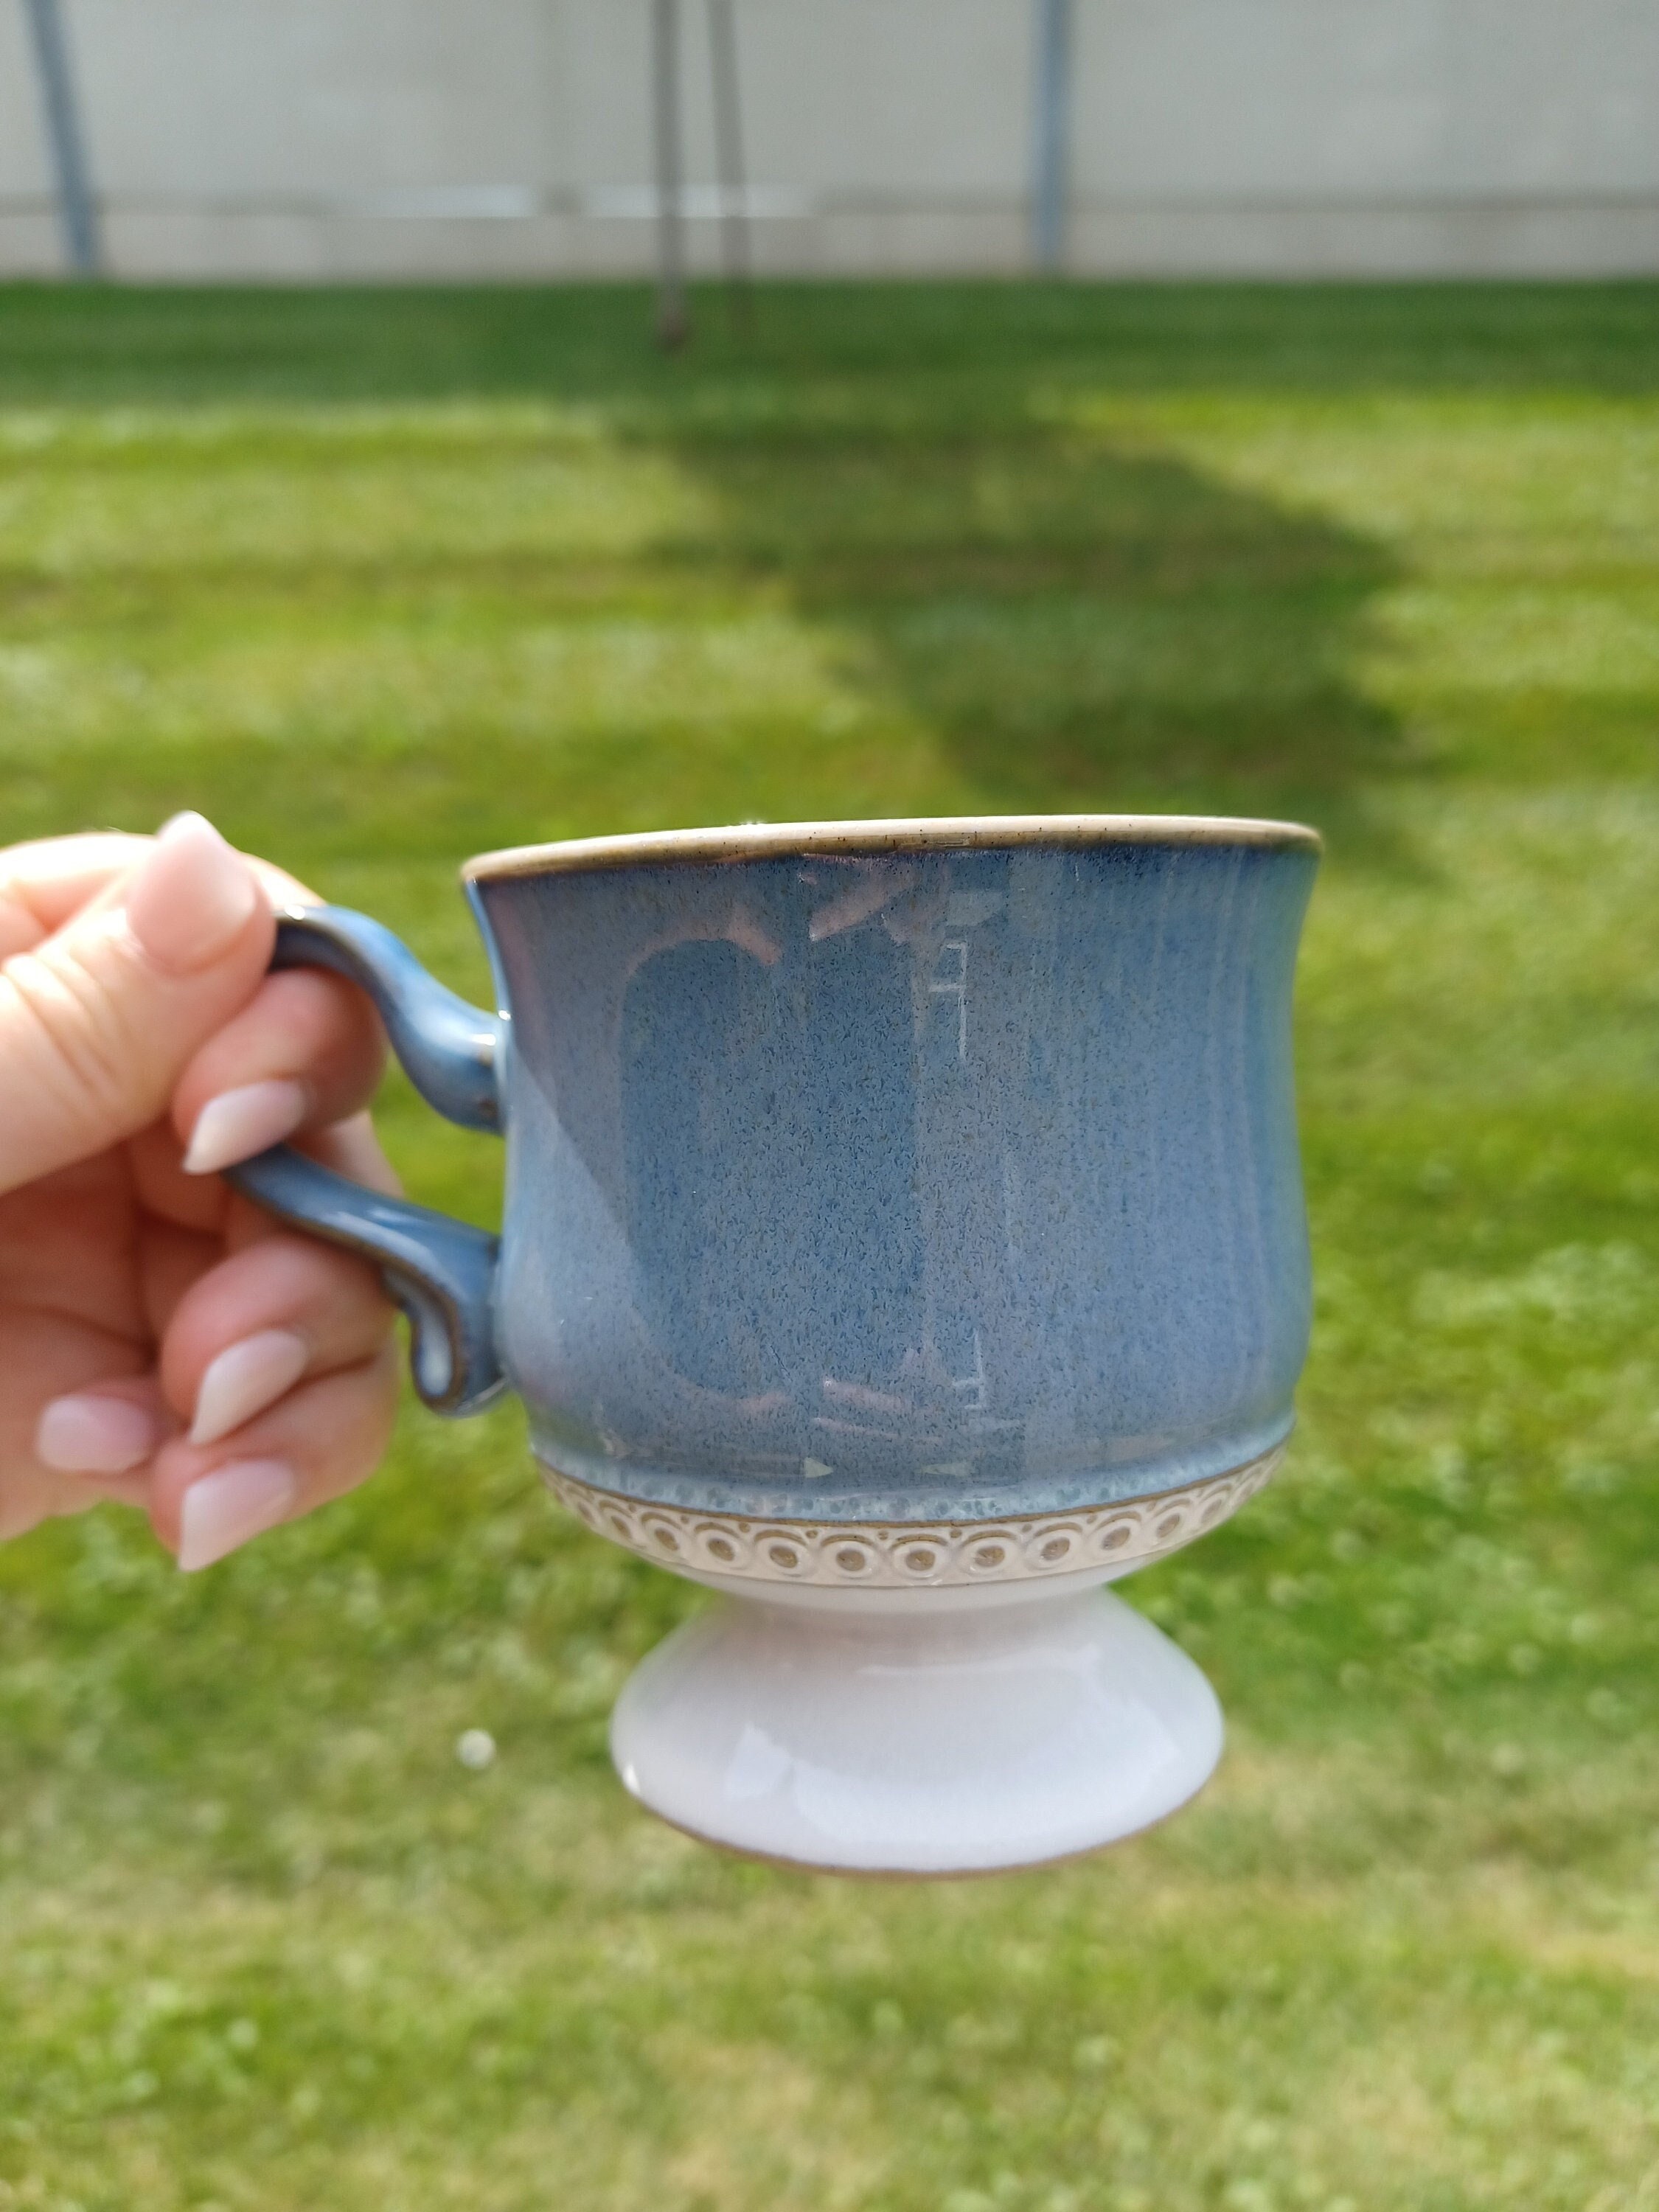 Blue Jetty Flat Cup & Saucer Set by Denby-Langley